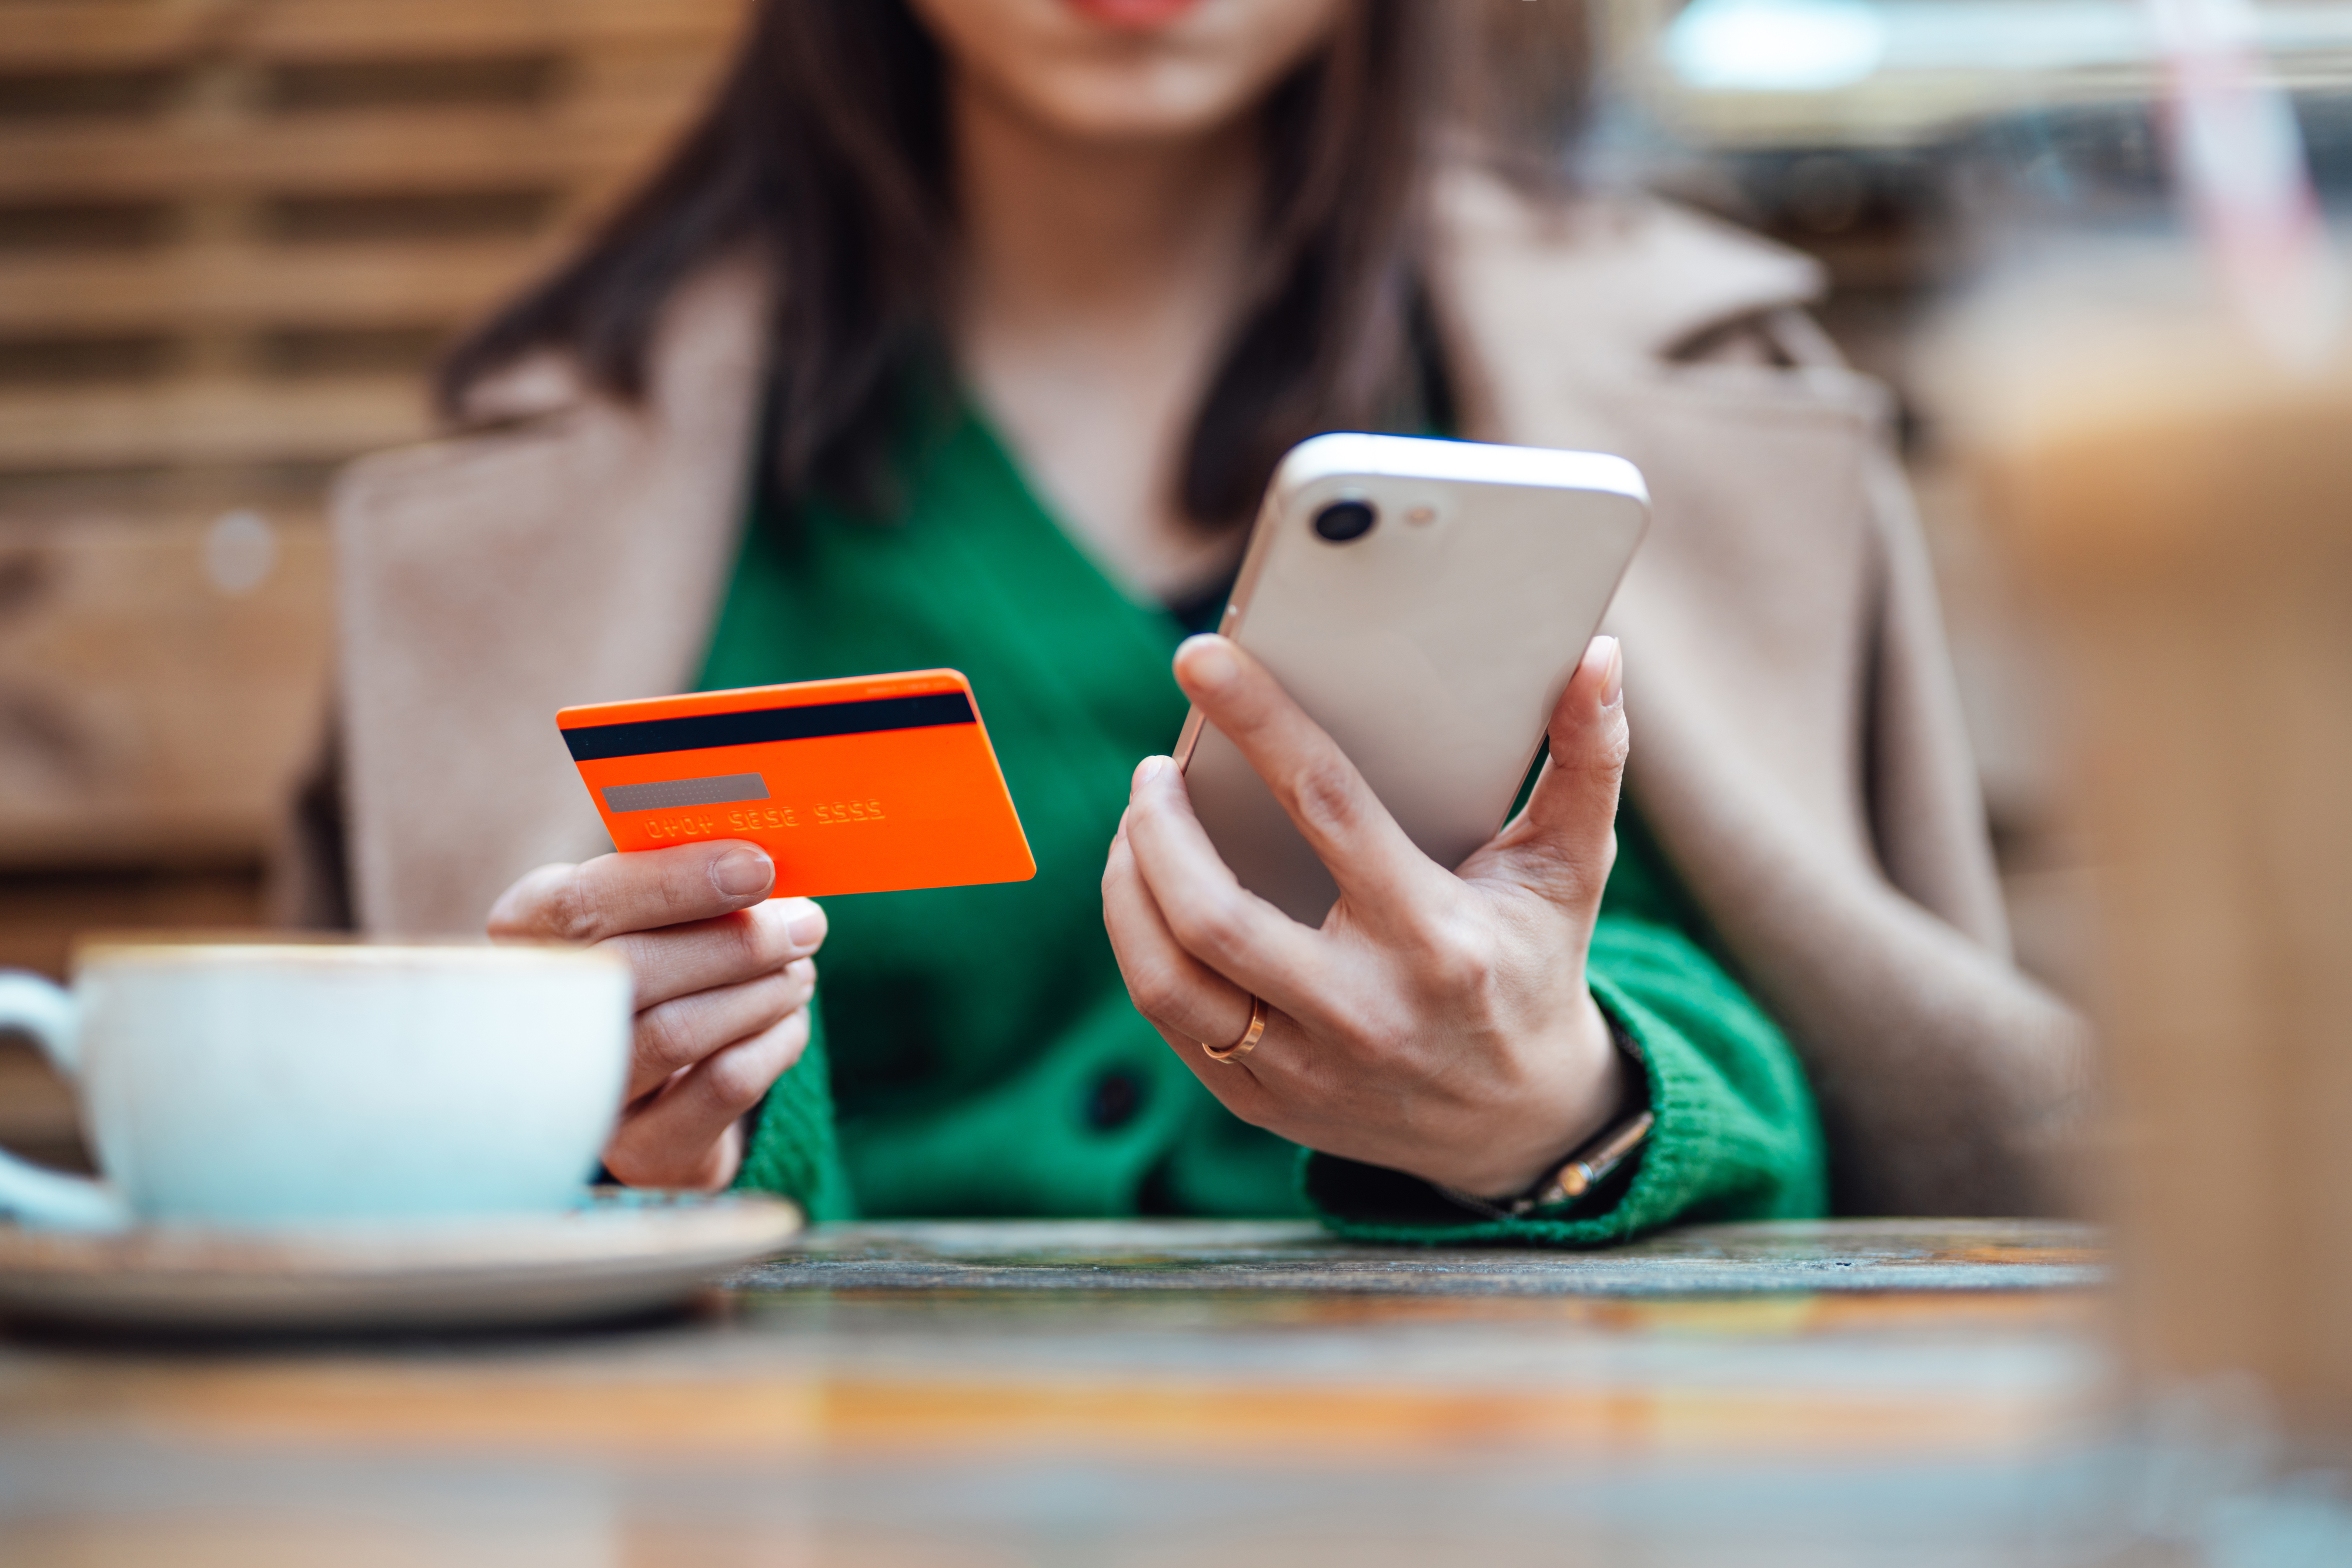 Person at a table with a phone and credit card, likely managing finances or shopping online